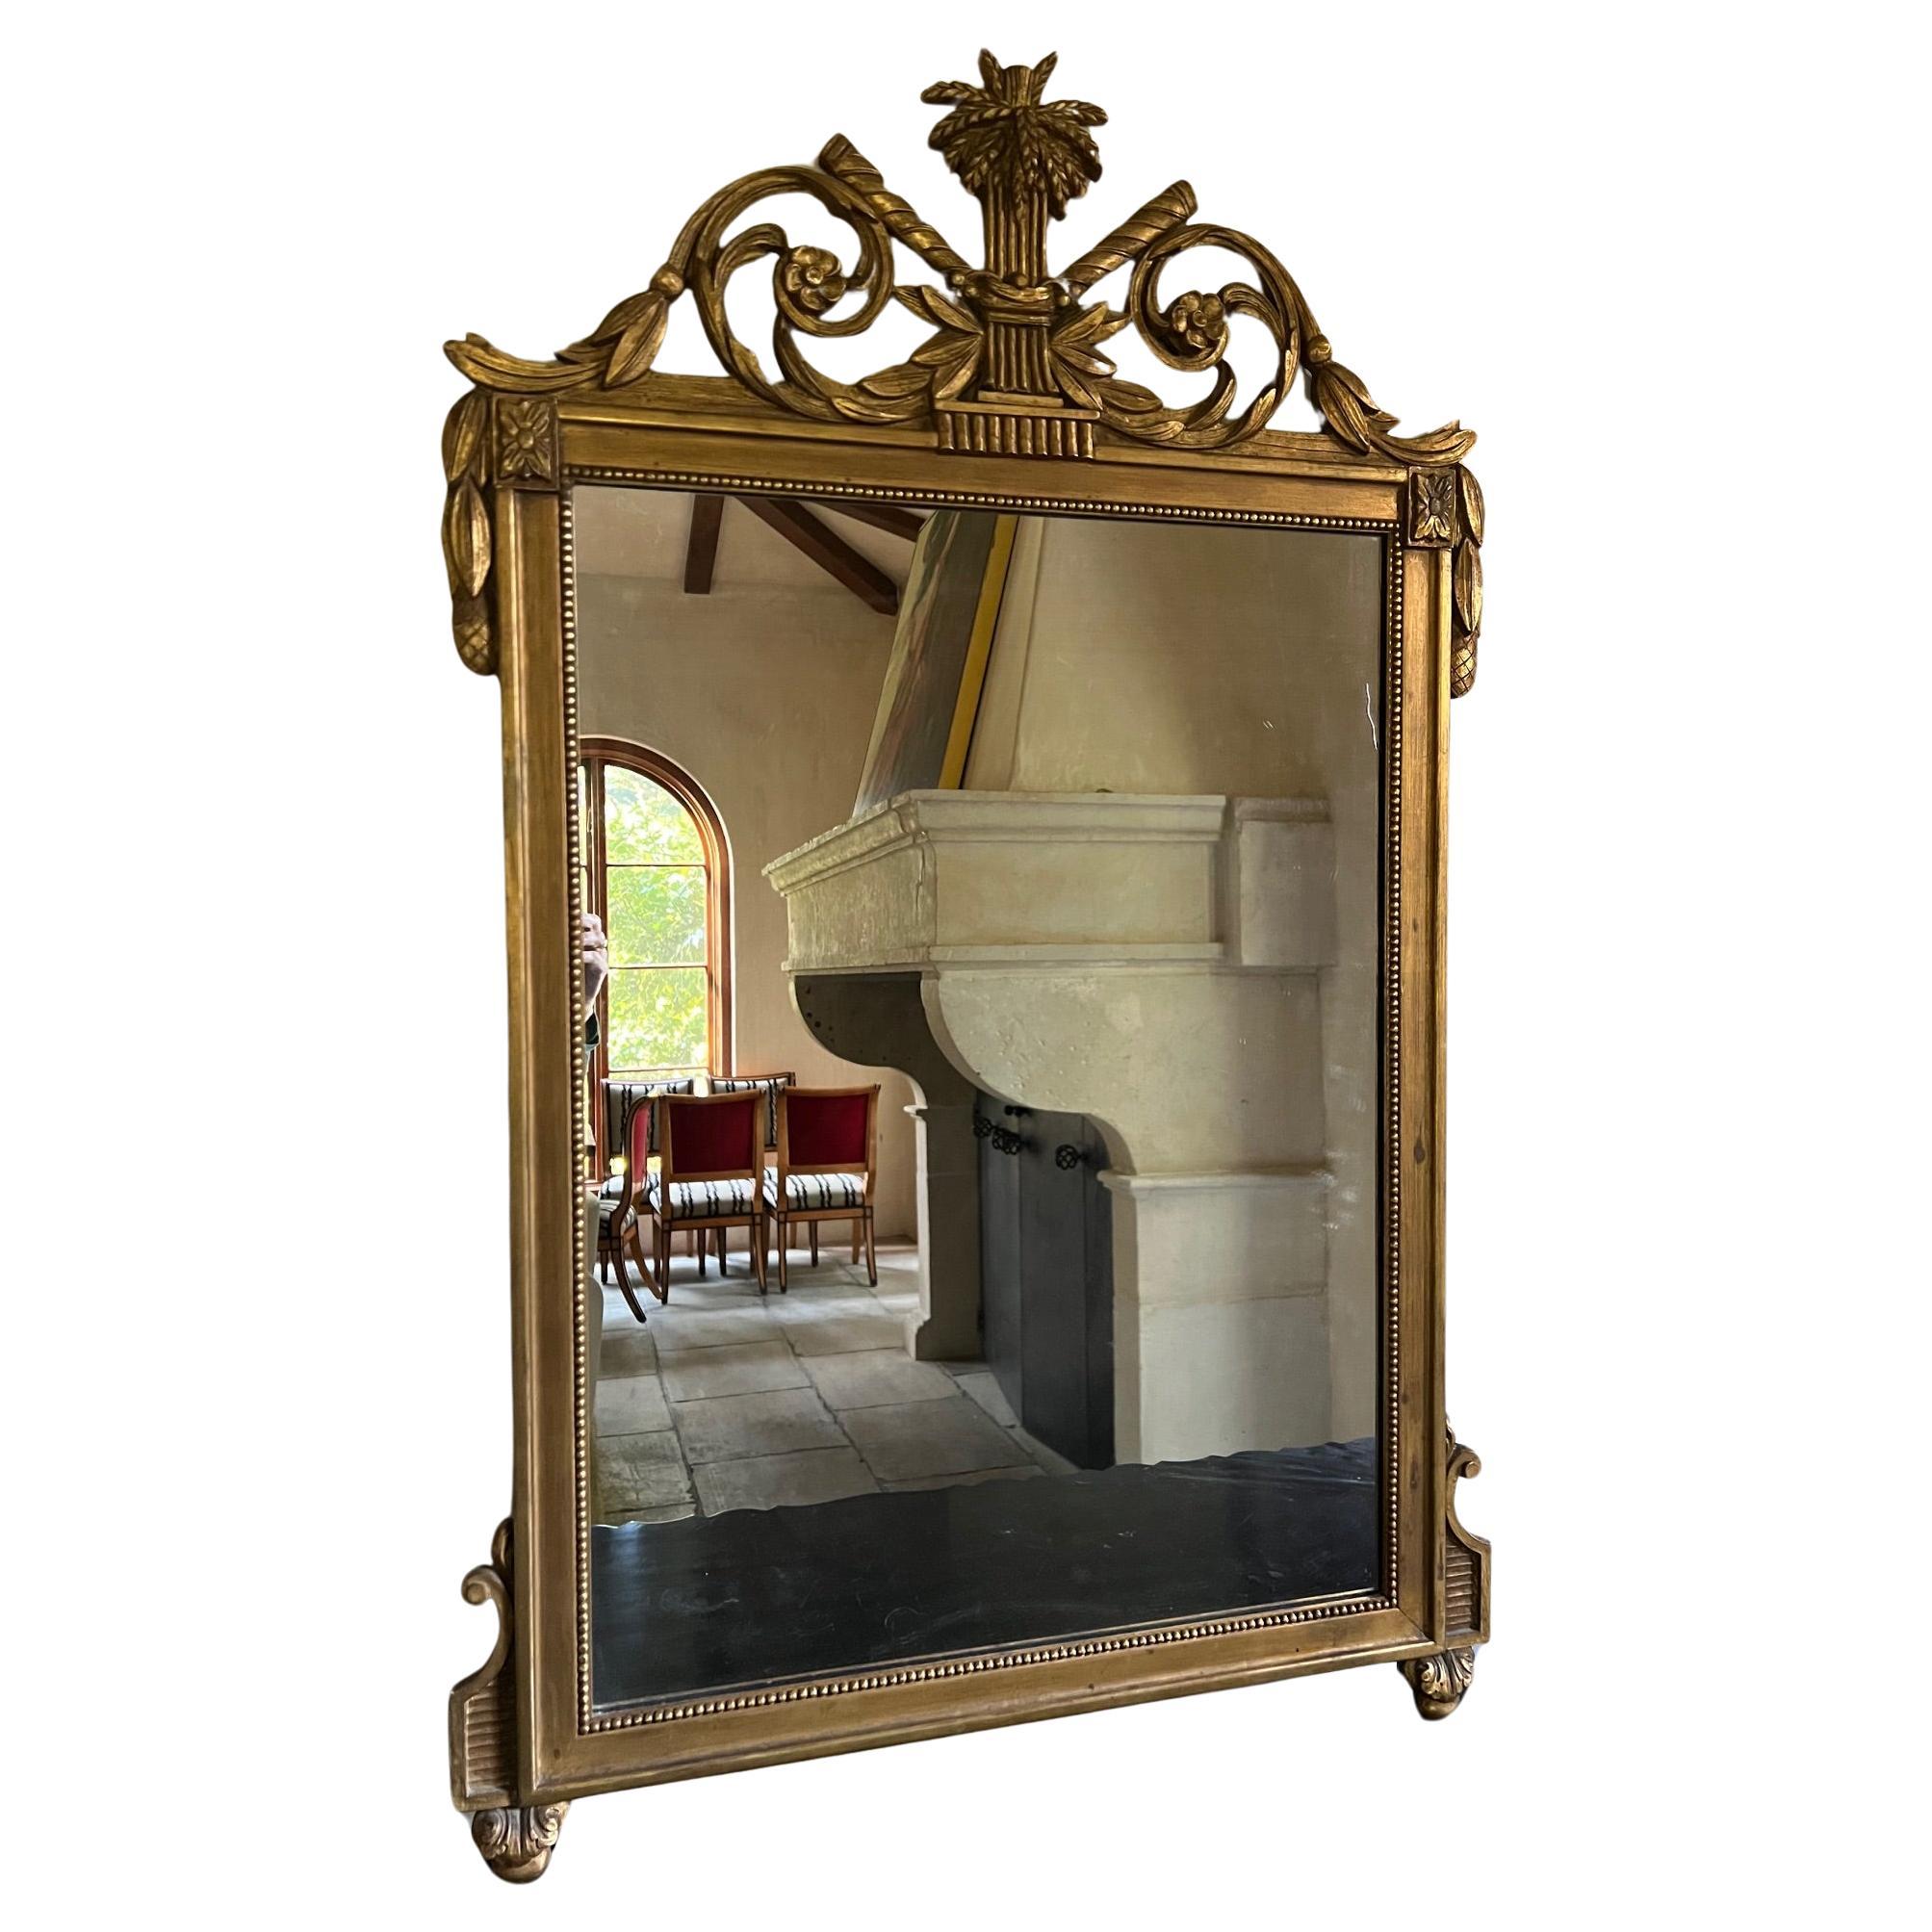 Vintage Decorative Arts, Inc., New York mirror in Louis XVI style with wheat, crowned by leaves and intertwined scrolls and flowers. The leaves go down each side with the corners embellished with more flowers, the frame is surrounded by wood